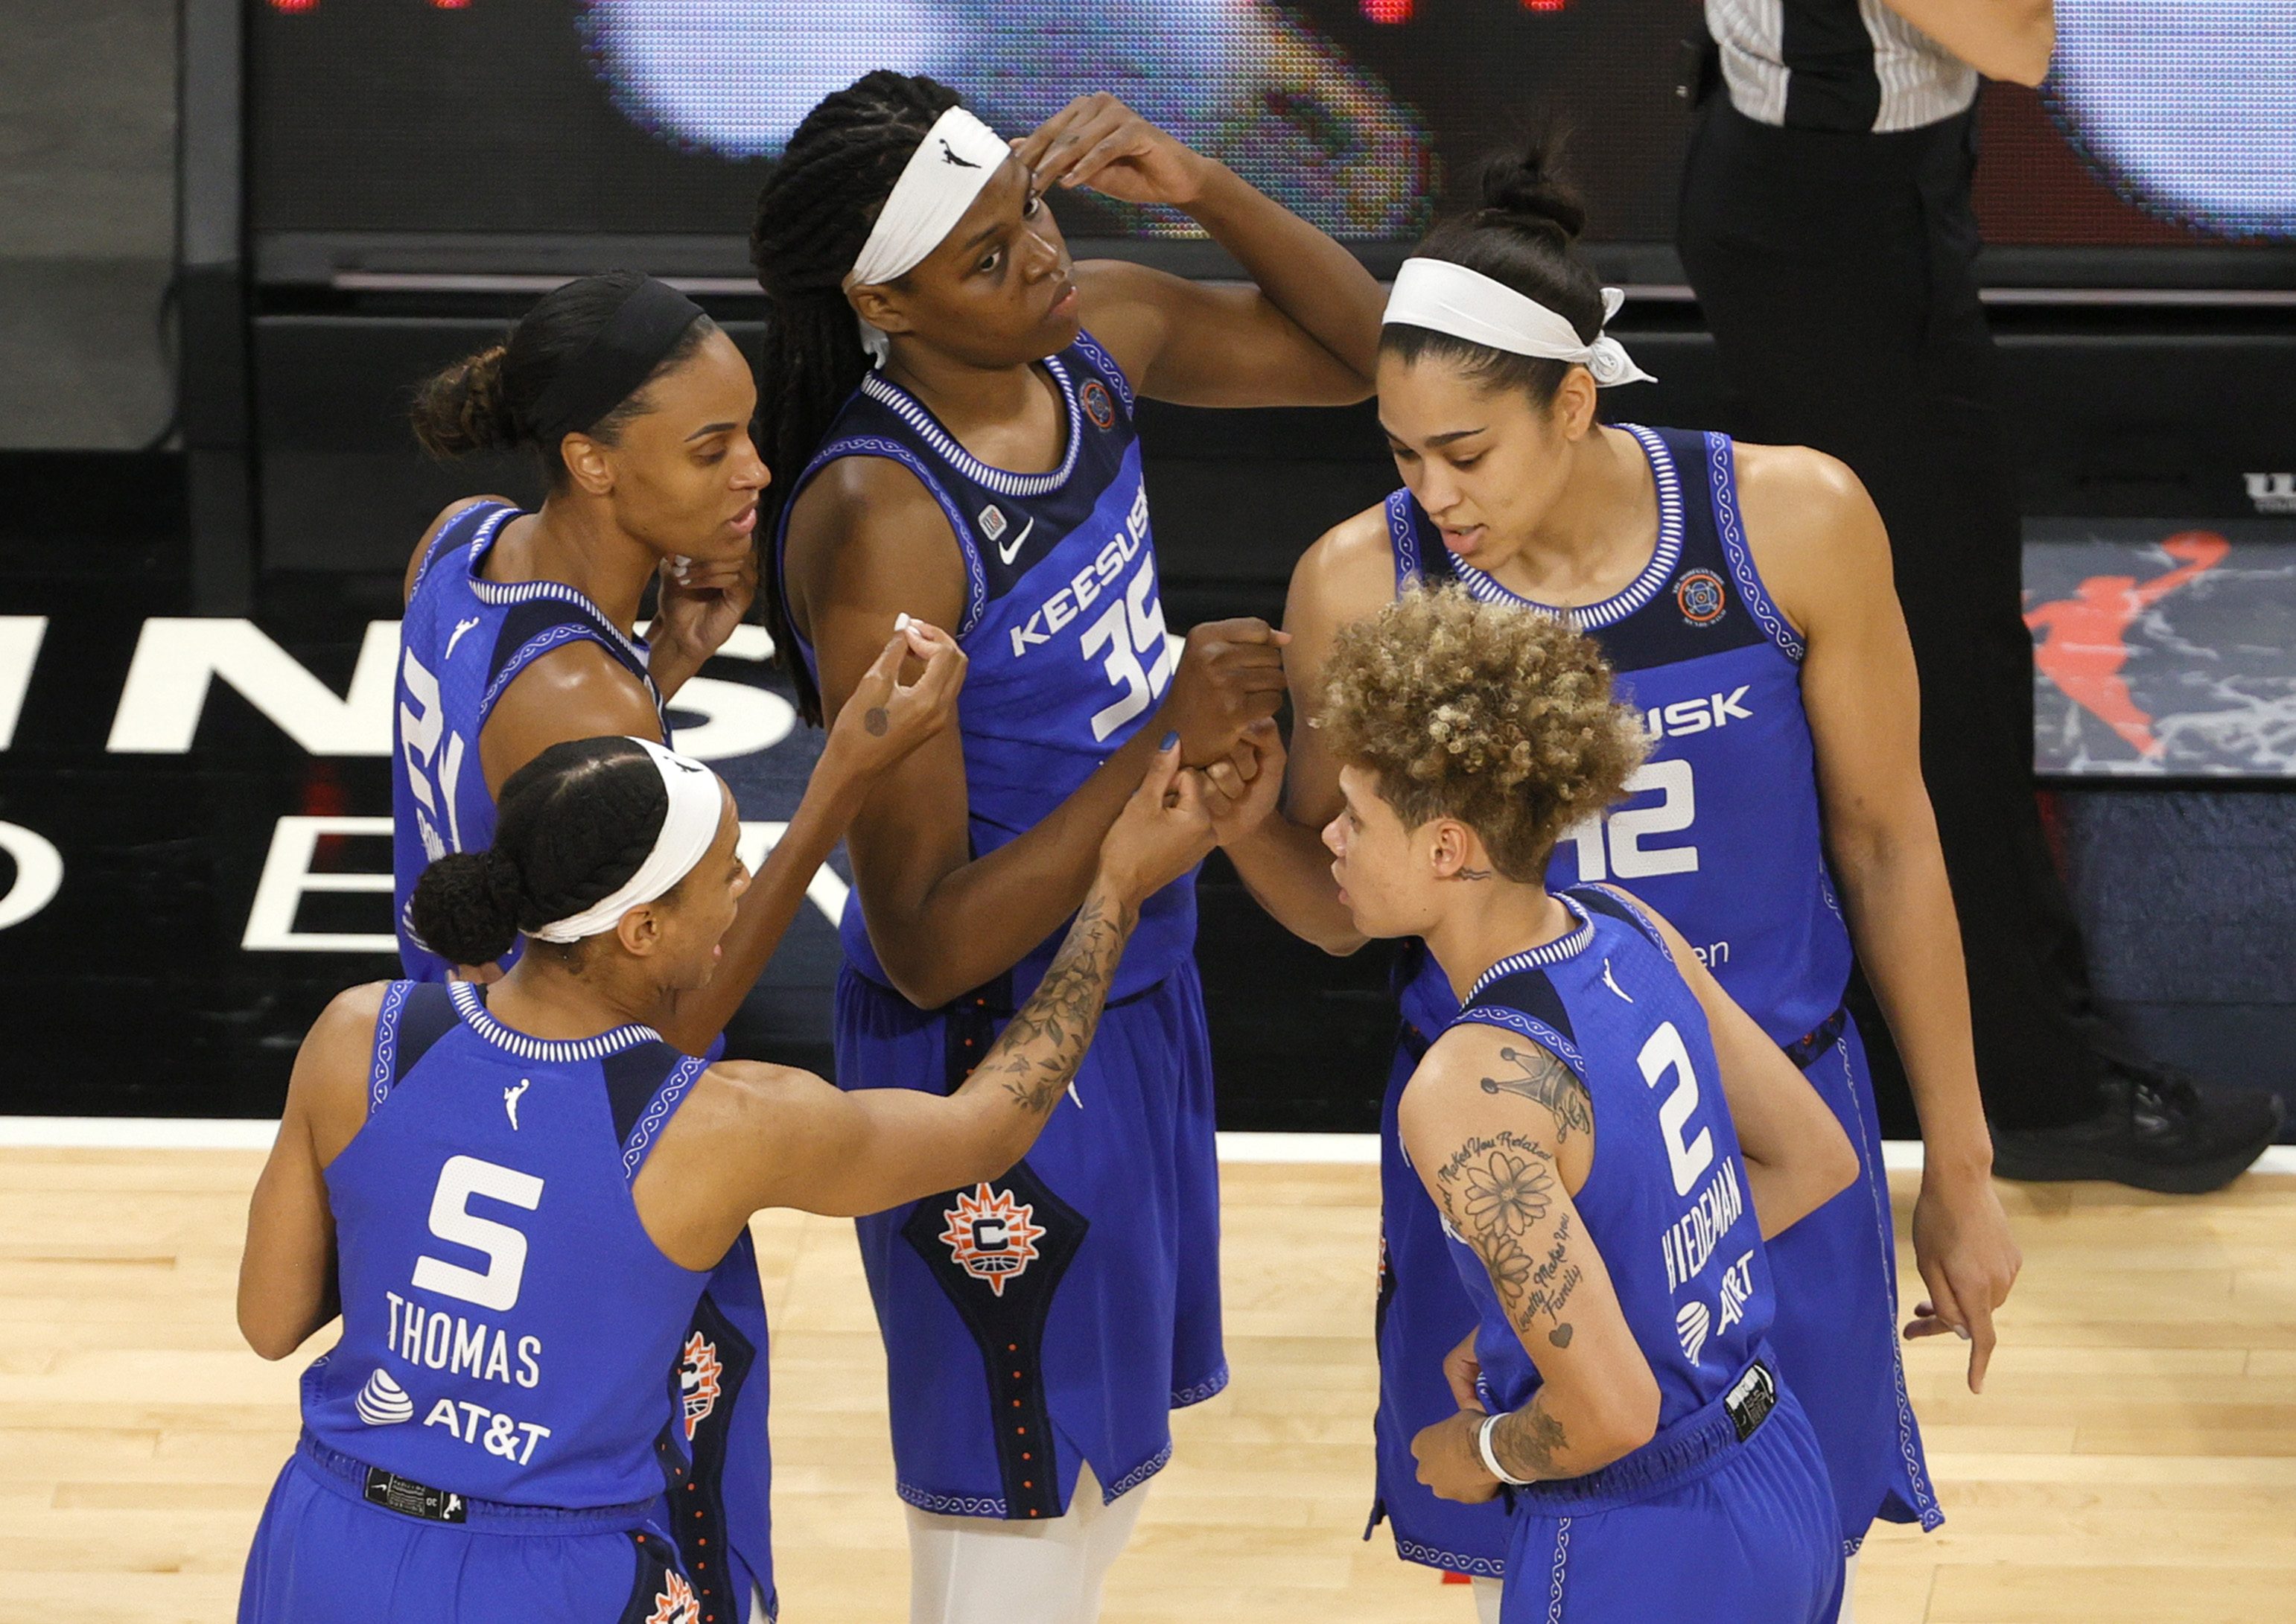 Jasmine Thomas #5, DeWanna Bonner #24, Jonquel Jones #35, Natisha Hiedeman #2 and Brionna Jones #42 of the Connecticut Sun huddle on the court before their game against the Las Vegas Aces at Michelob ULTRA Arena on May 23, 2021 in Las Vegas, Nevada. The Sun defeated the Aces 72-65.